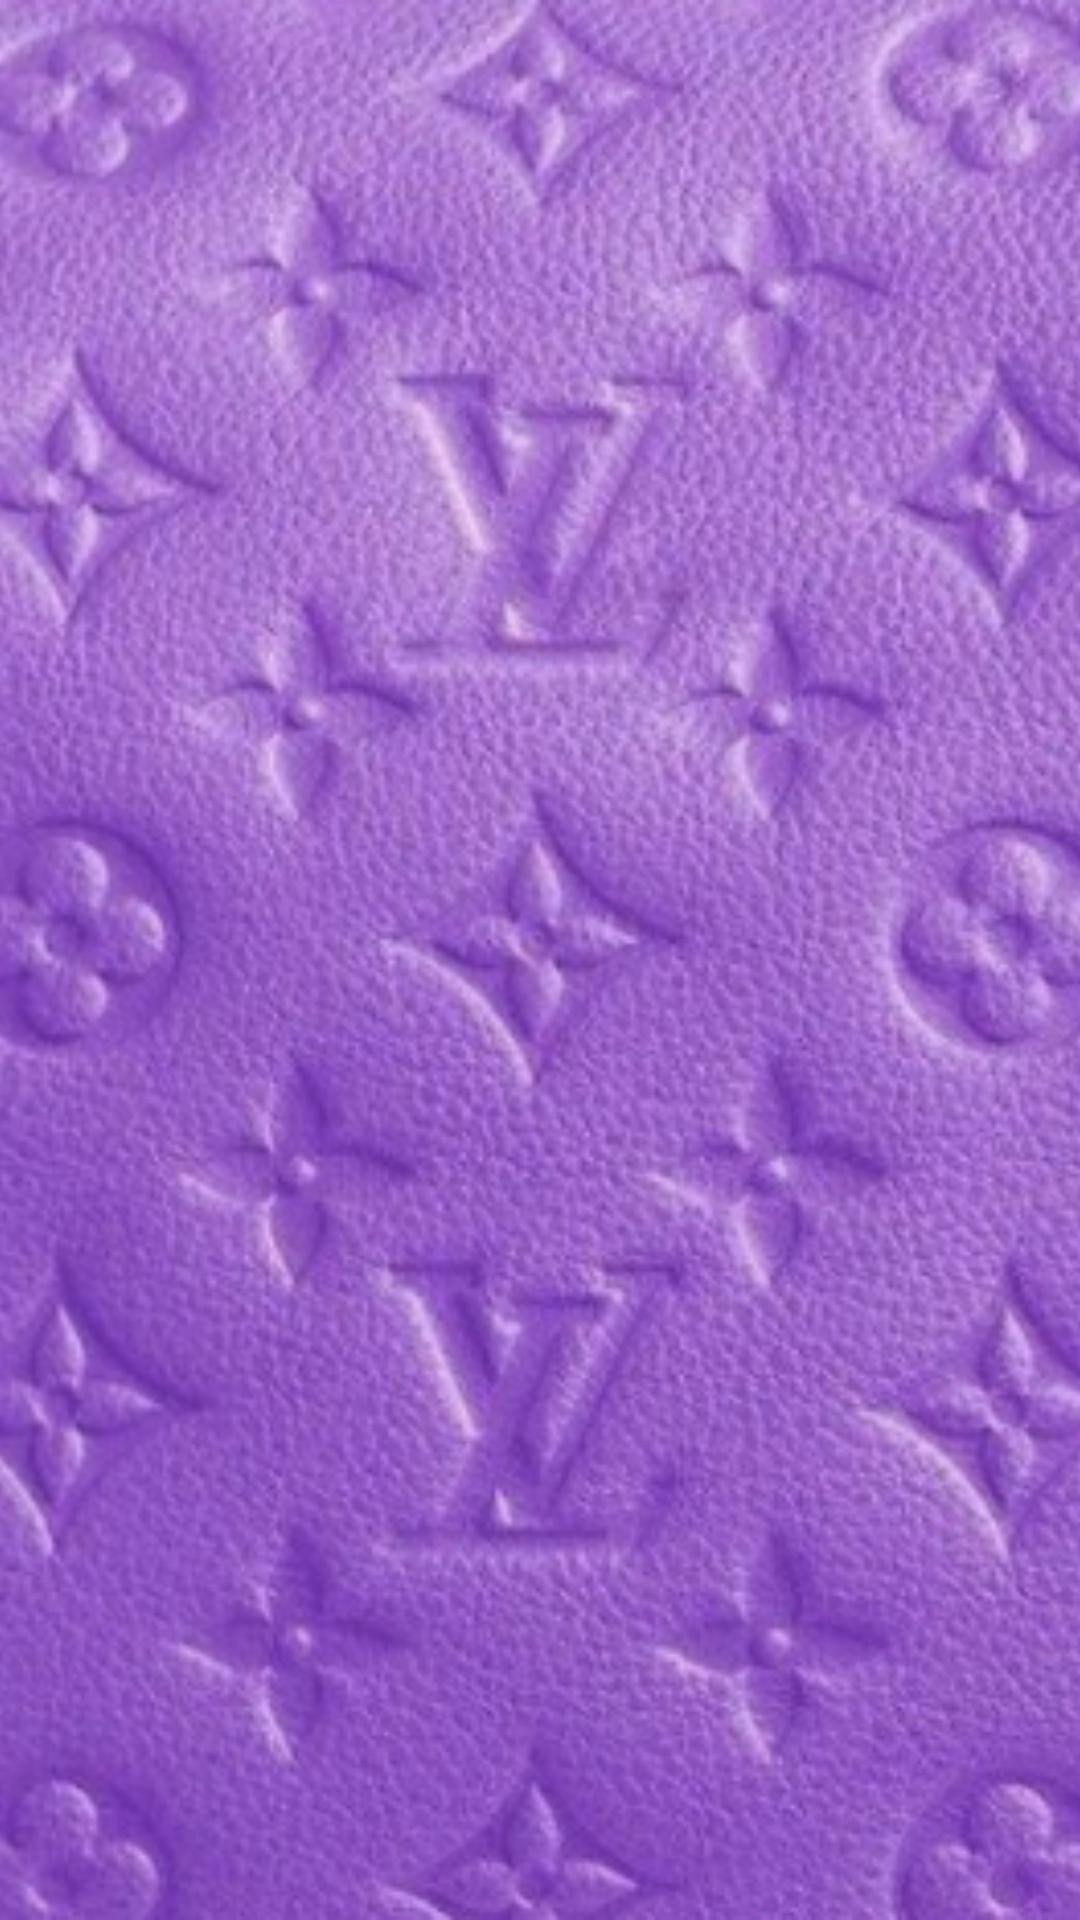 Louis Vuitton iPhone Wallpaper with high-resolution 1080x1920 pixel. You can use this wallpaper for your iPhone 5, 6, 7, 8, X, XS, XR backgrounds, Mobile Screensaver, or iPad Lock Screen - Louis Vuitton, baddie